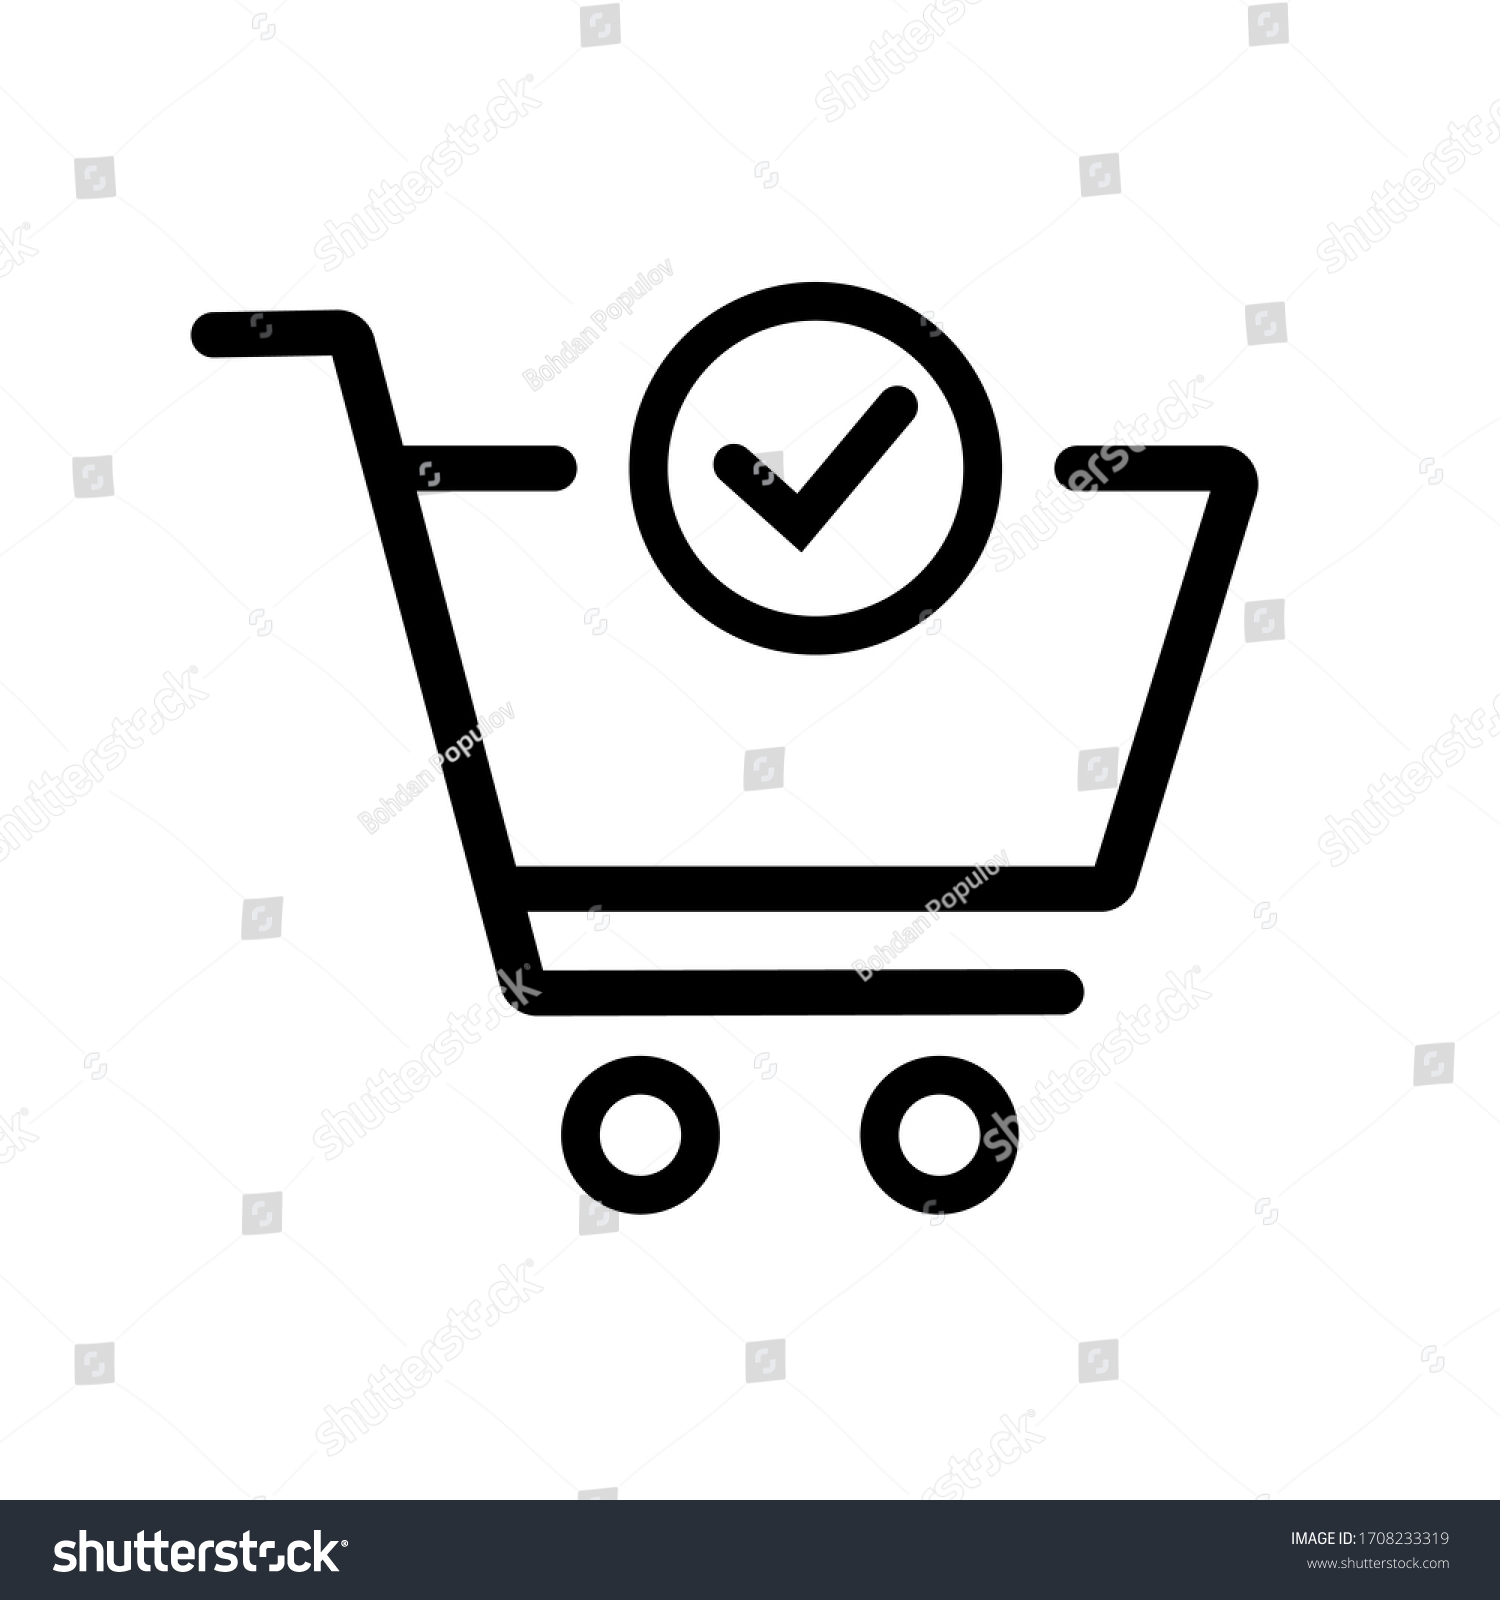 SVG of Shopping Cart and Check Mark Icon. Trolley symbol on white background. Vector Illustration. svg